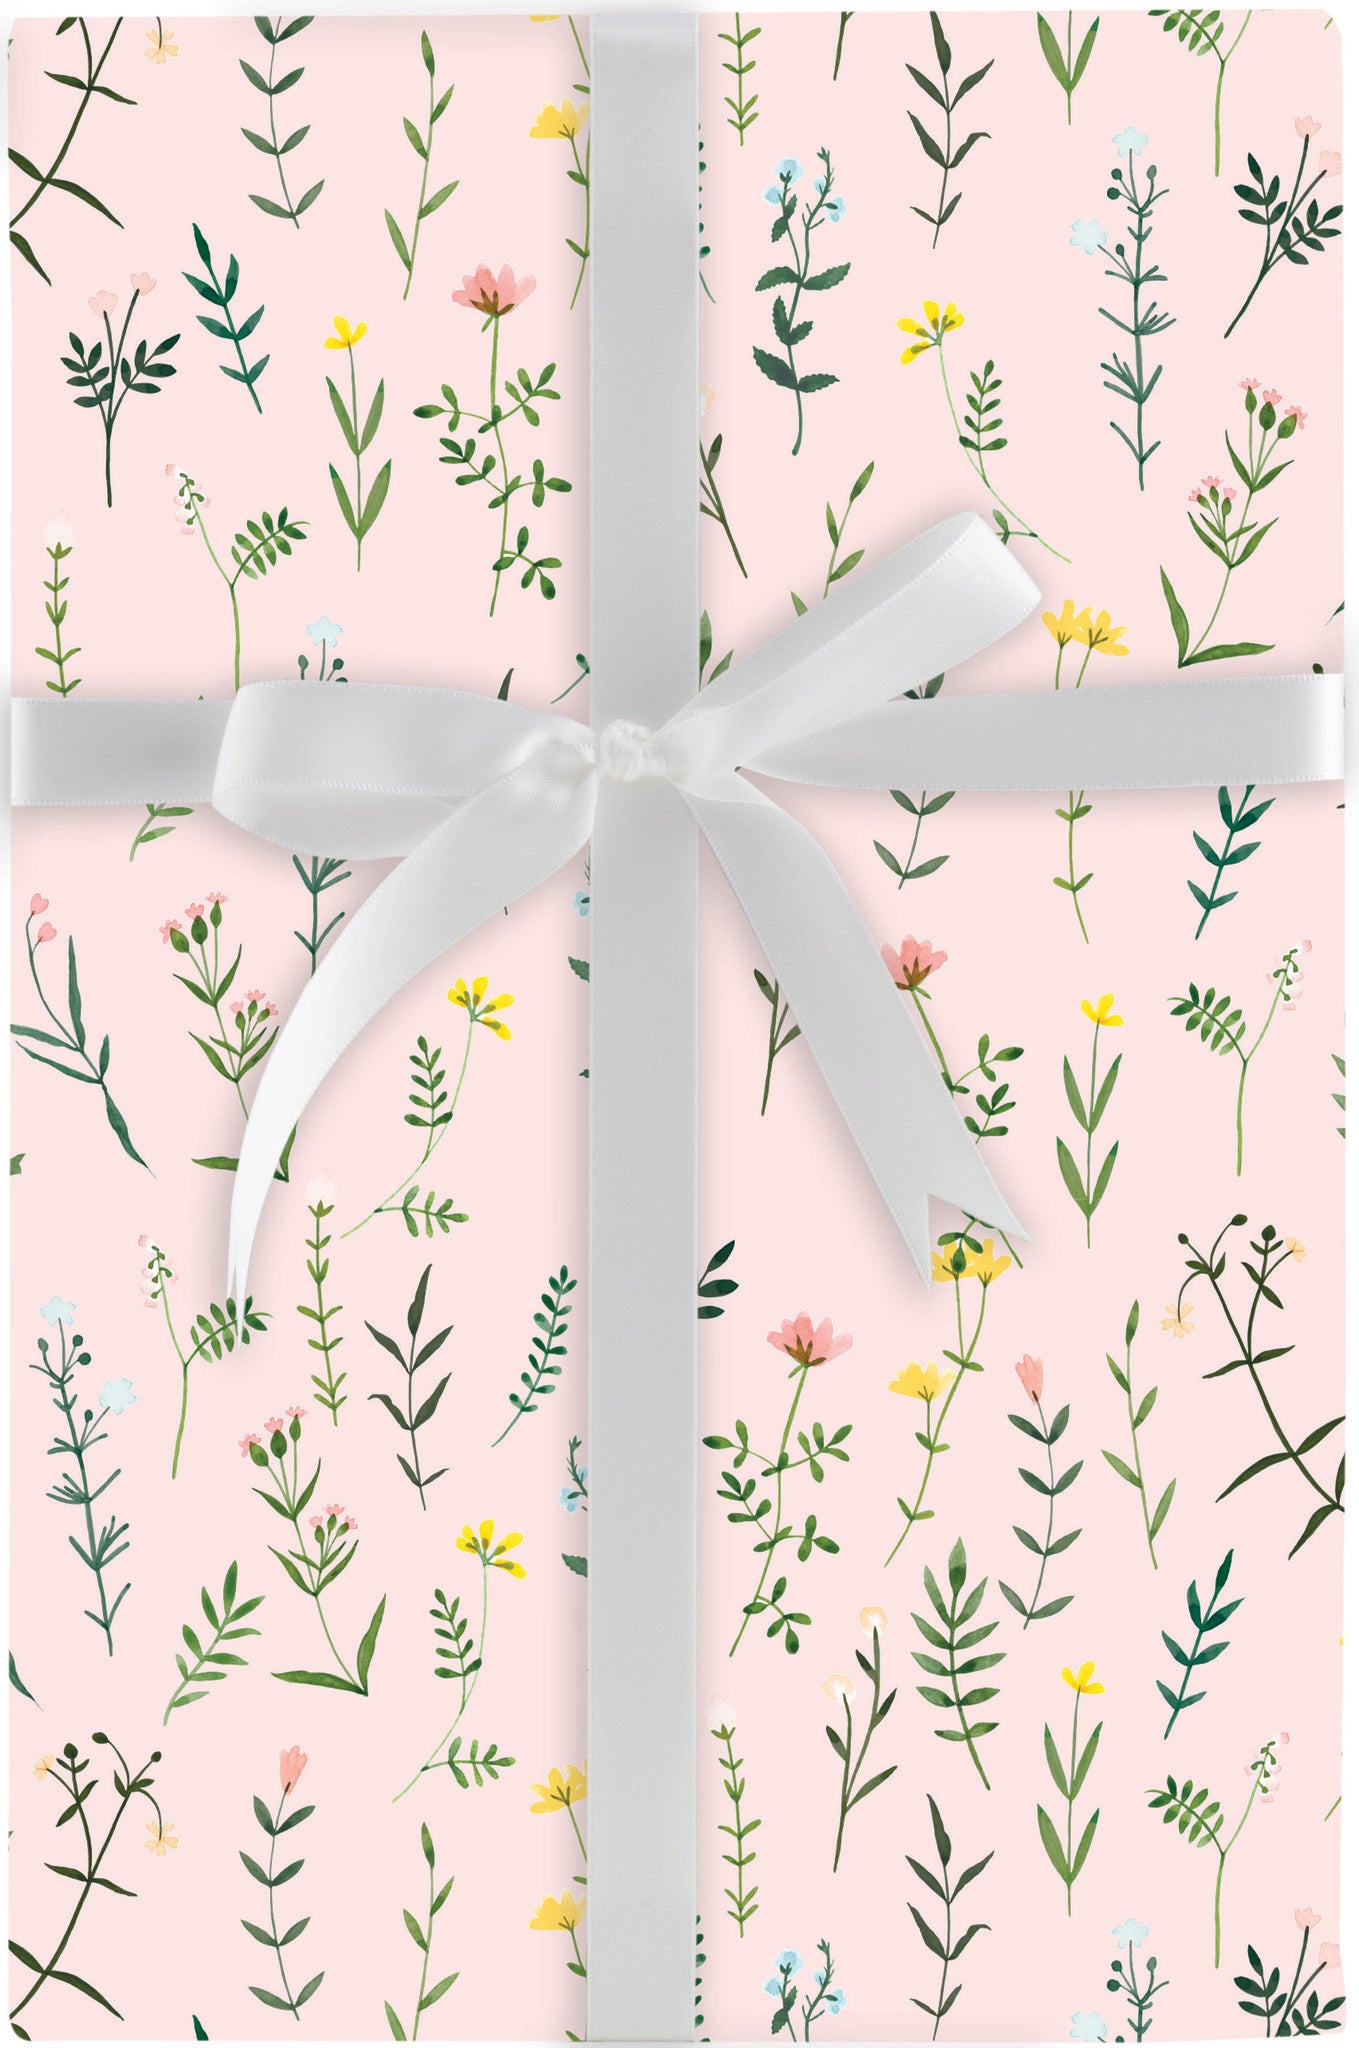 Accuprints Gift Wrapping Paper Pack Of 12 | Design Multiwrapping |Size 20 x  30 inch… : Amazon.in: Home & Kitchen